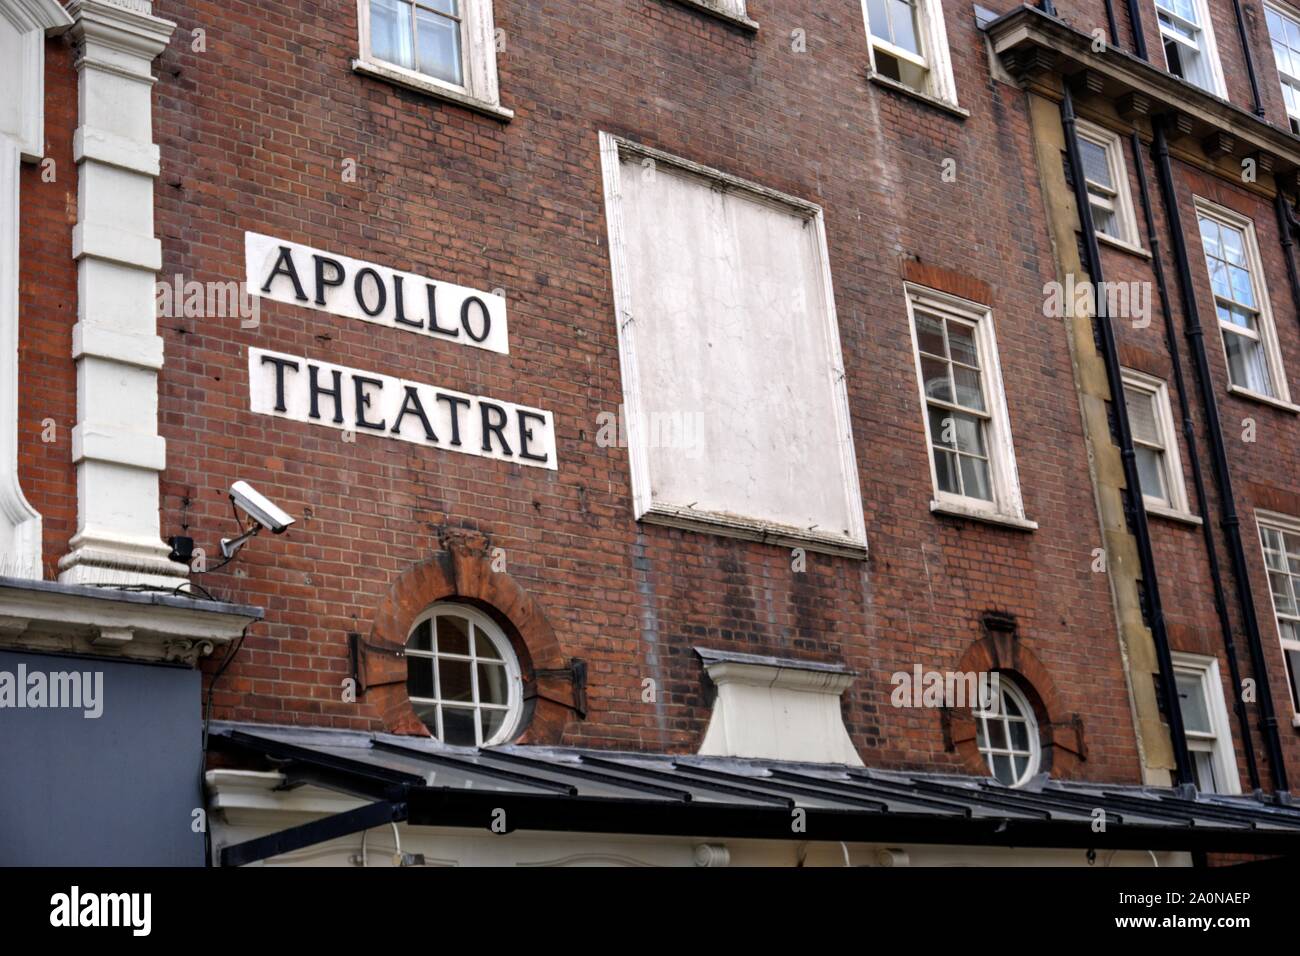 London, United Kingdom - September 7, 2019: Facade of Apollo theatre in Shaftesbury Avenue showing name signage Stock Photo